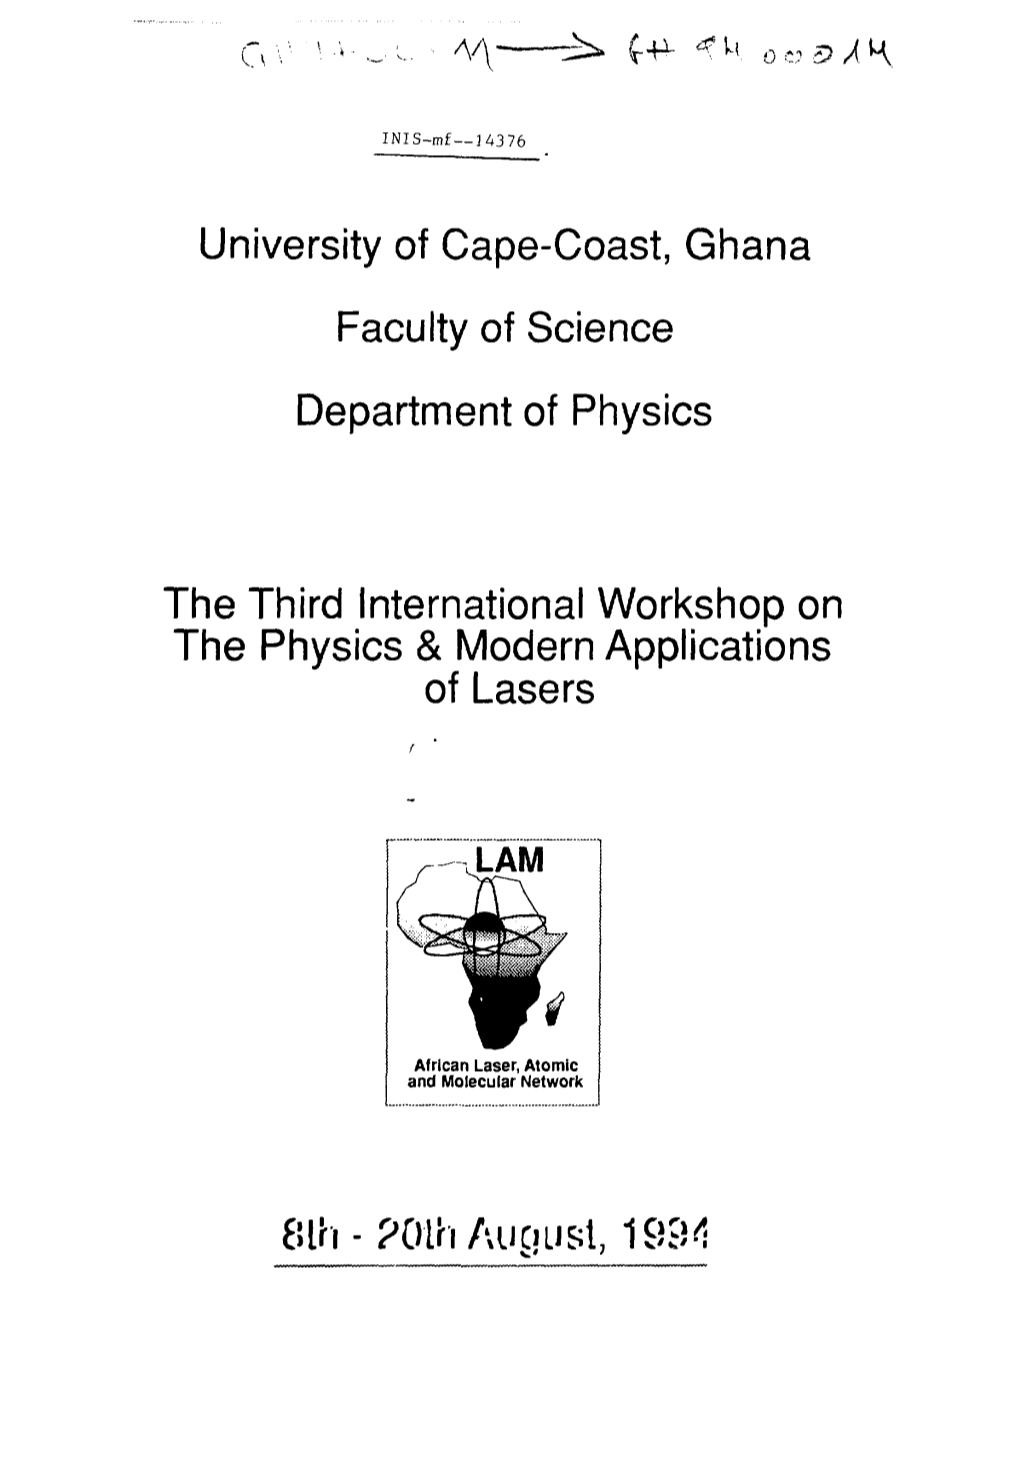 University of Cape-Coast, Ghana Faculty of Science Department of Physics